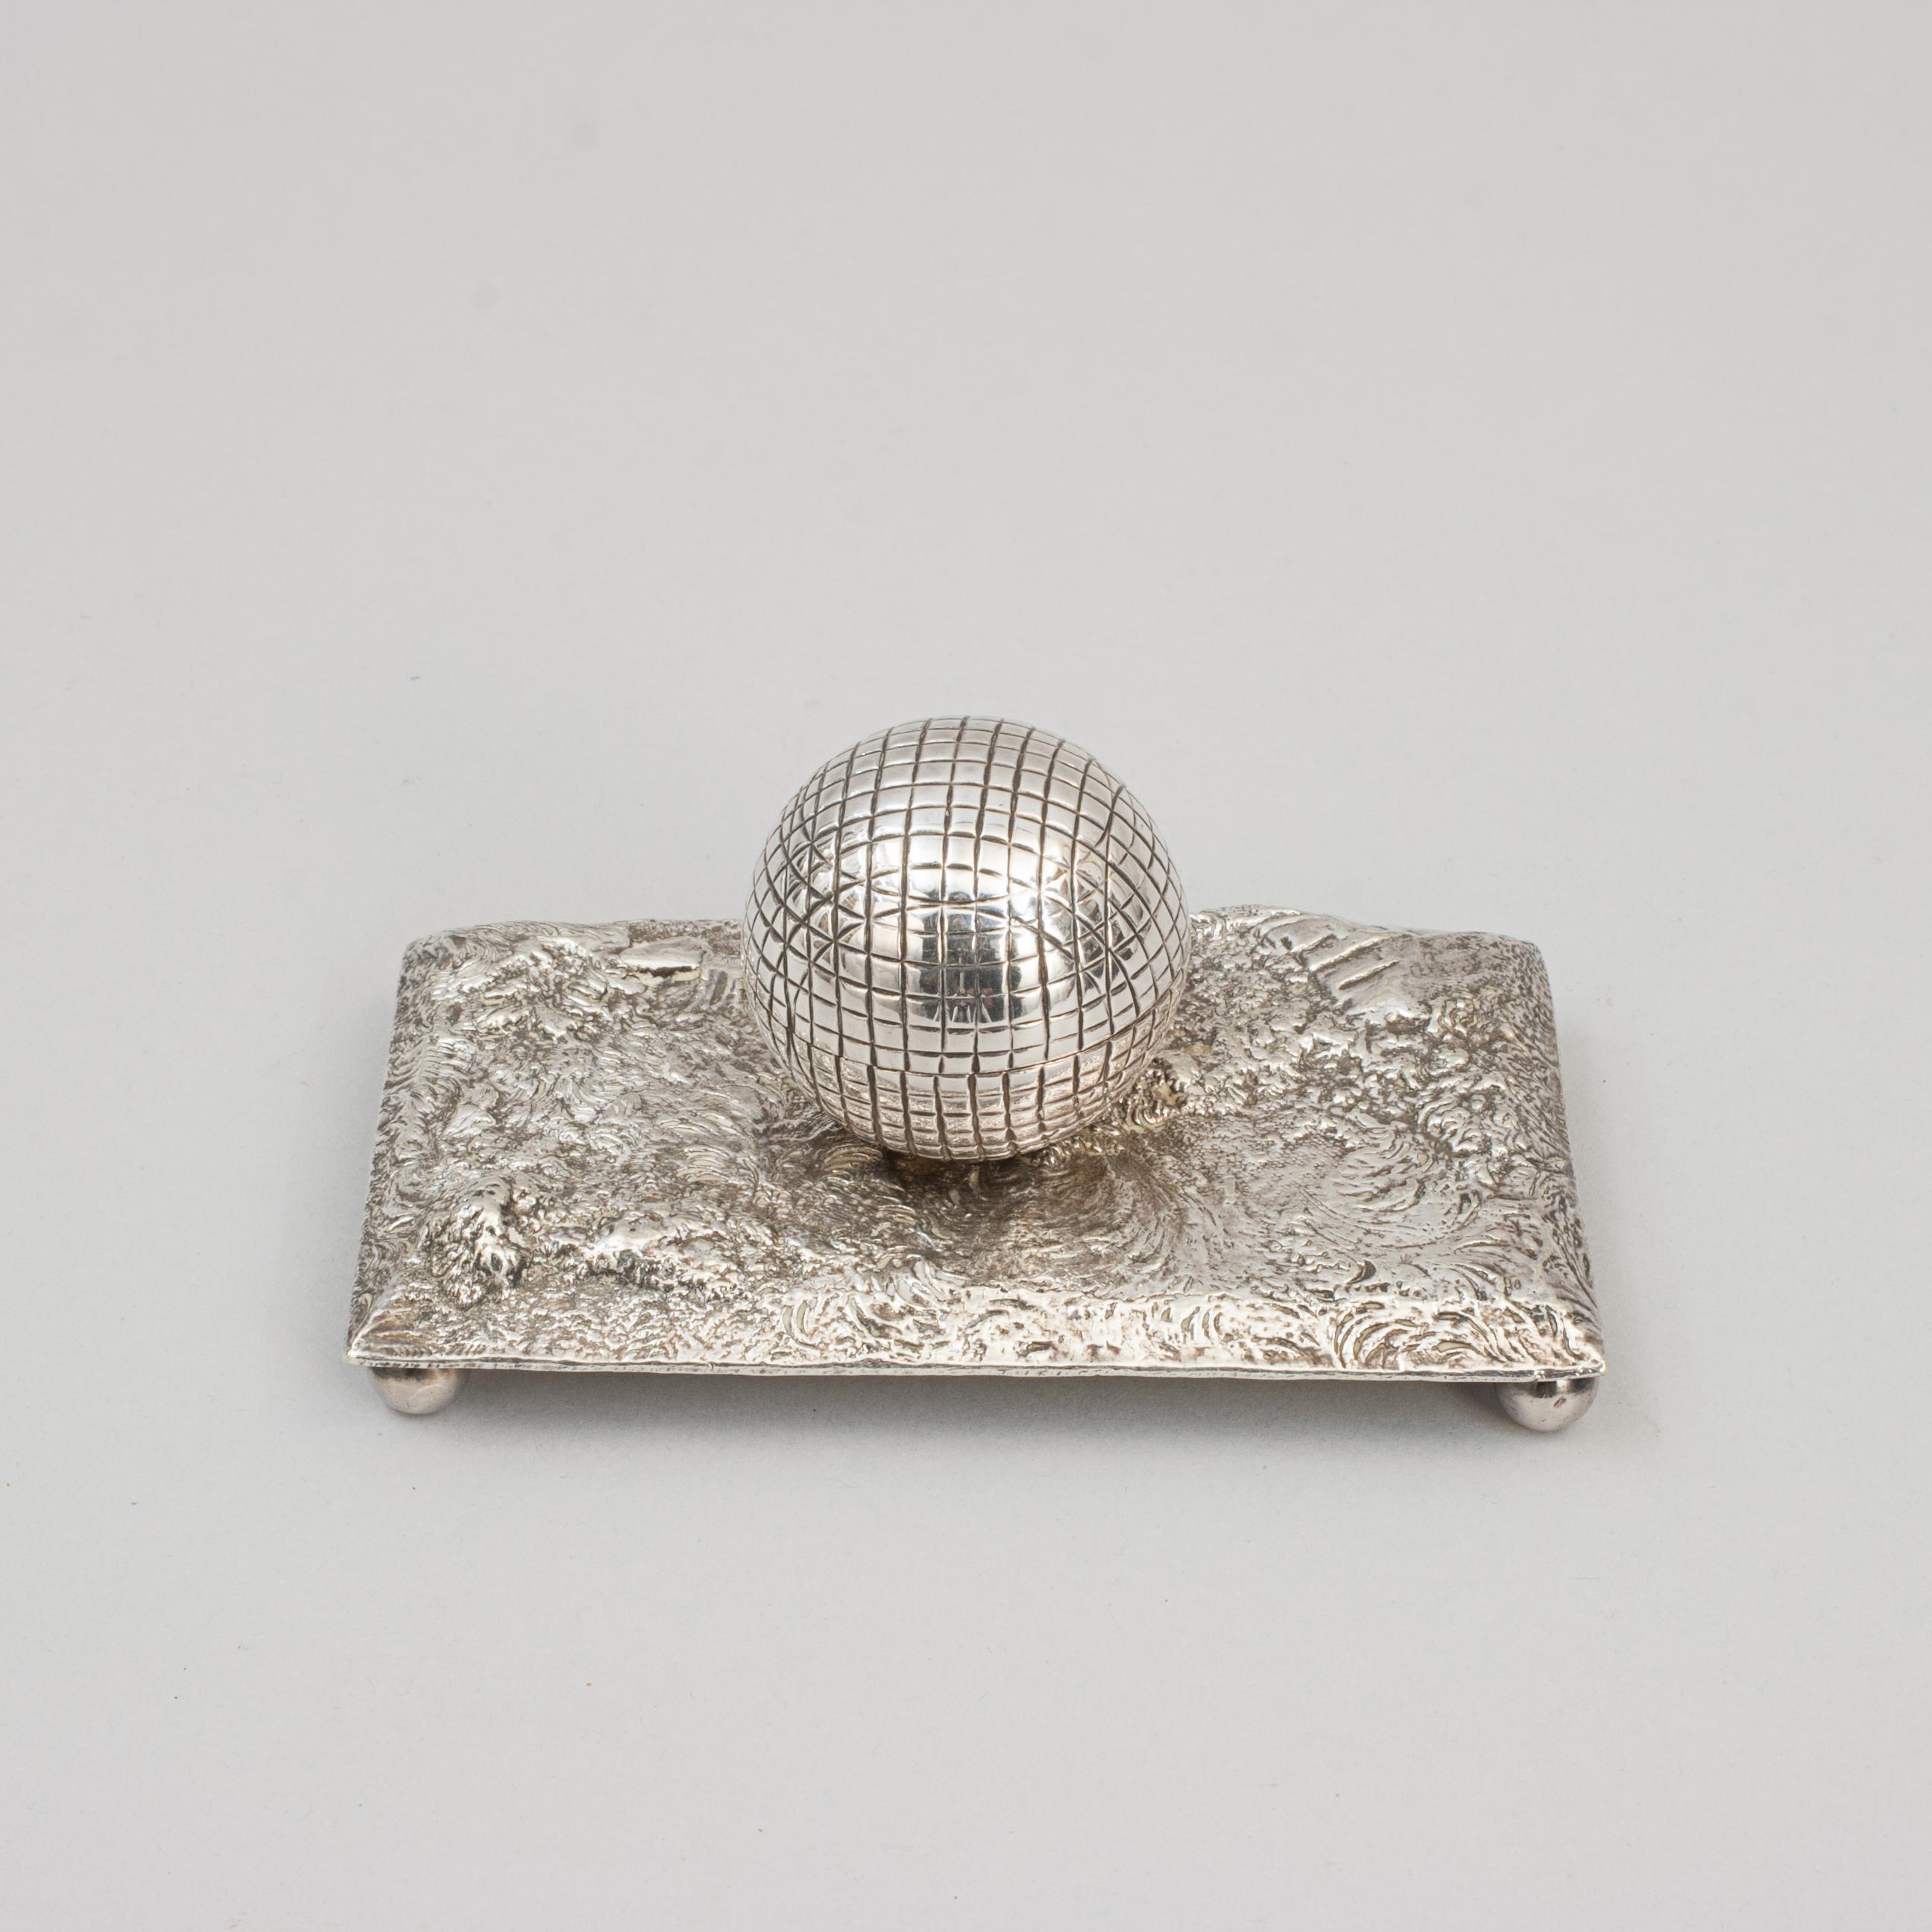 Victorian Novelty Golf Silver Plated Inkwell. 
A fine quality plated golf inkwell with rectangular base raised on four ball feet. There is a single ink well mounted onto the base in the shape of gutter percha golf ball. The hinged lid on the golf